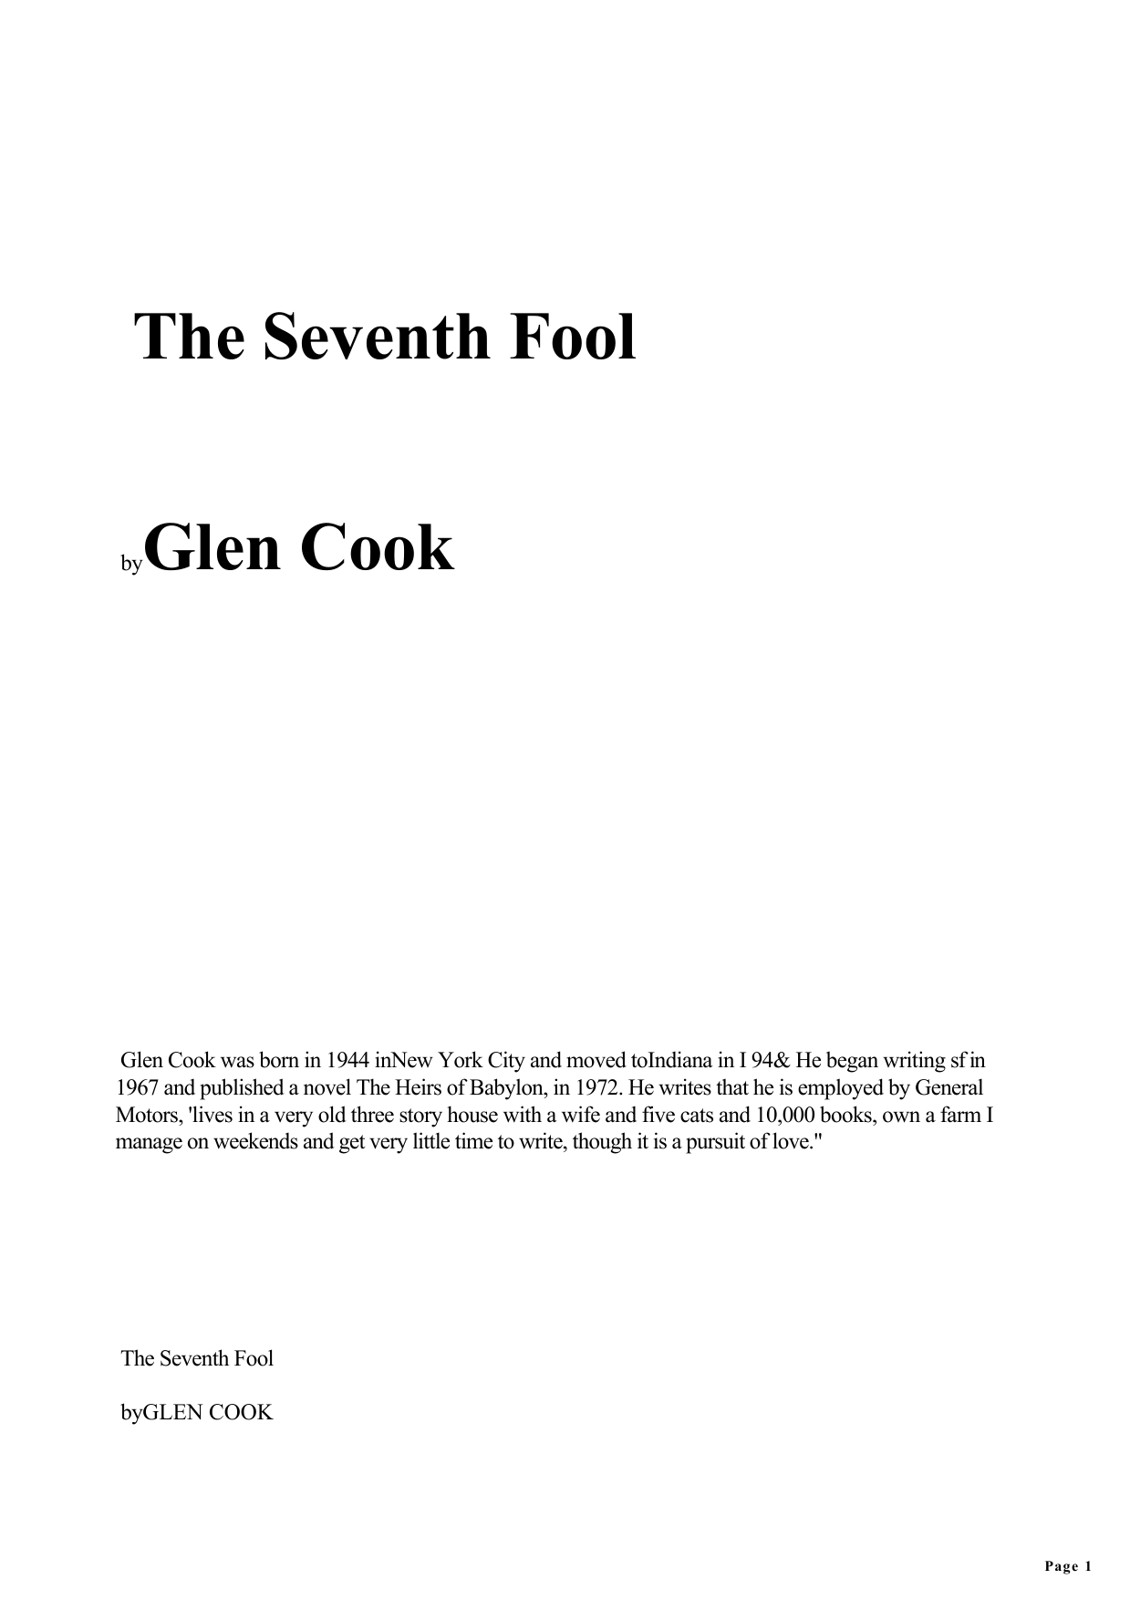 The Seventh Fool